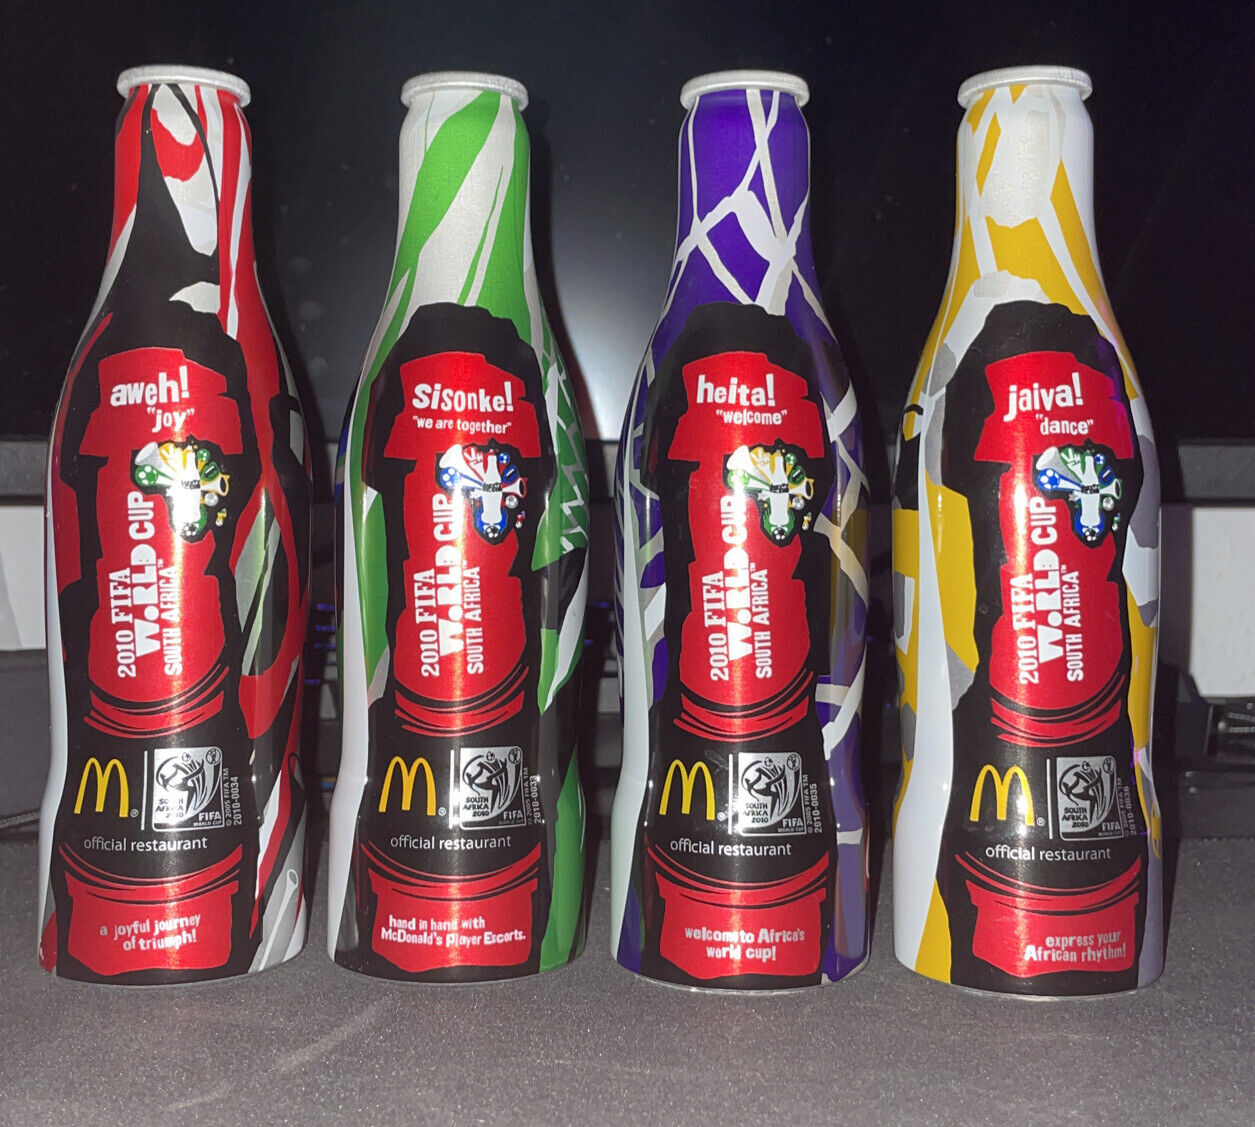 Coca-Cola & McDonald’s 2010 FIFA WORLD CUP SOUTH AFRICA All 4 Collectible Bottle